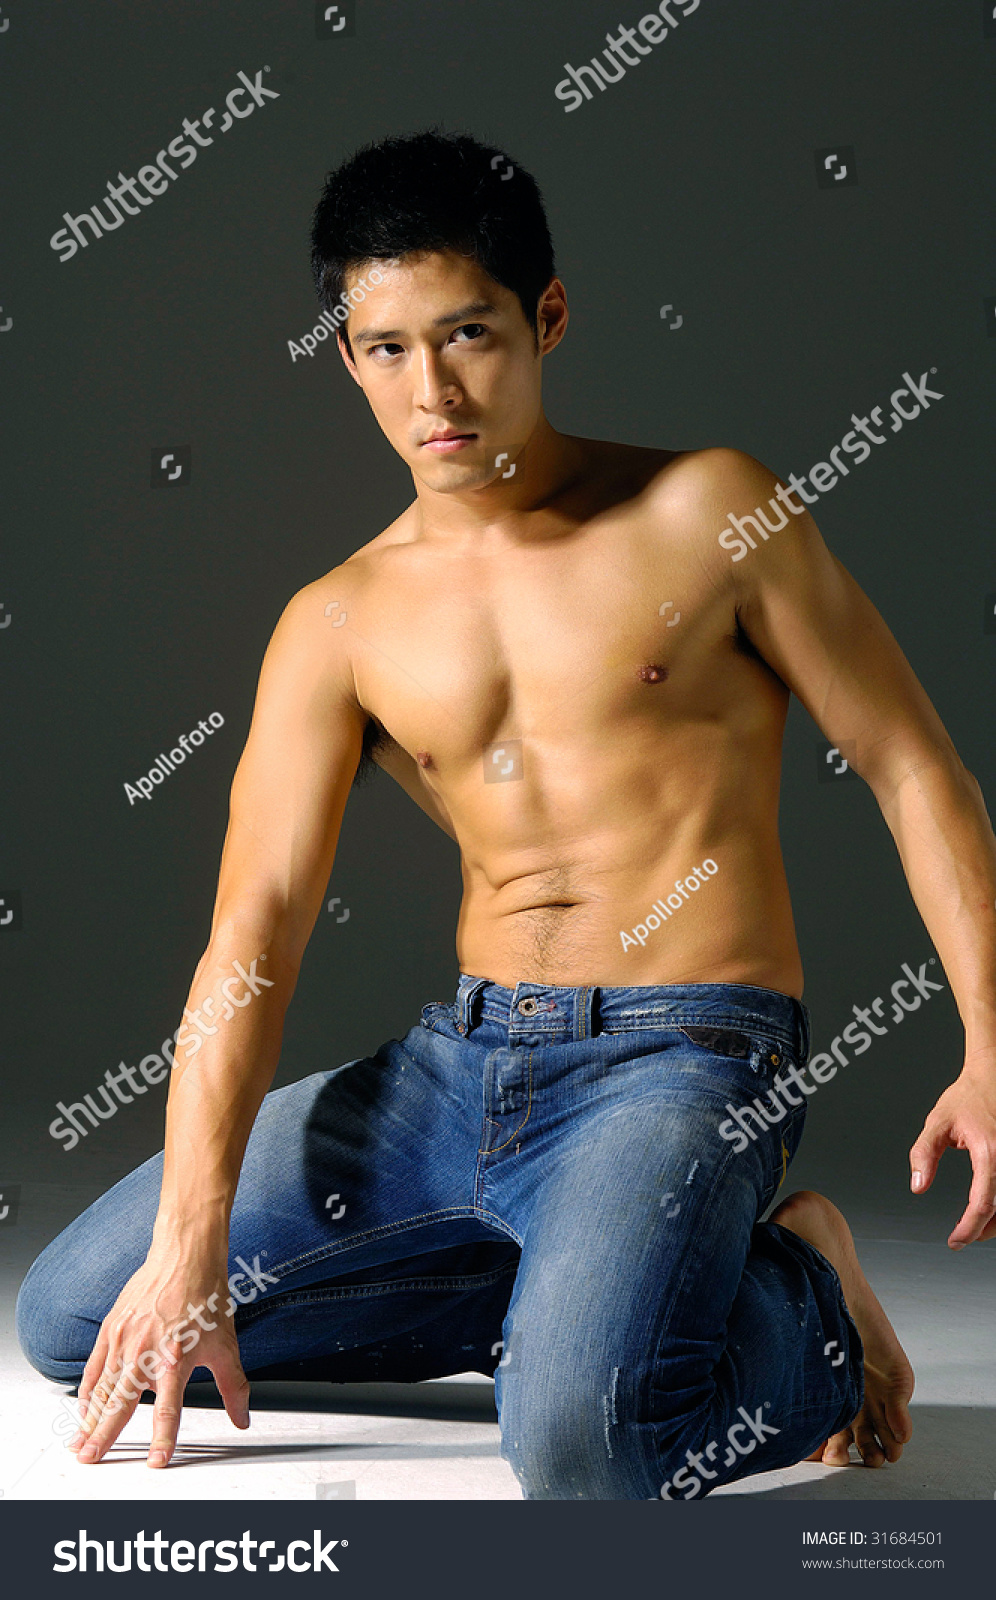 Young Male Model Stock Photo 31684501 - Shutterstock